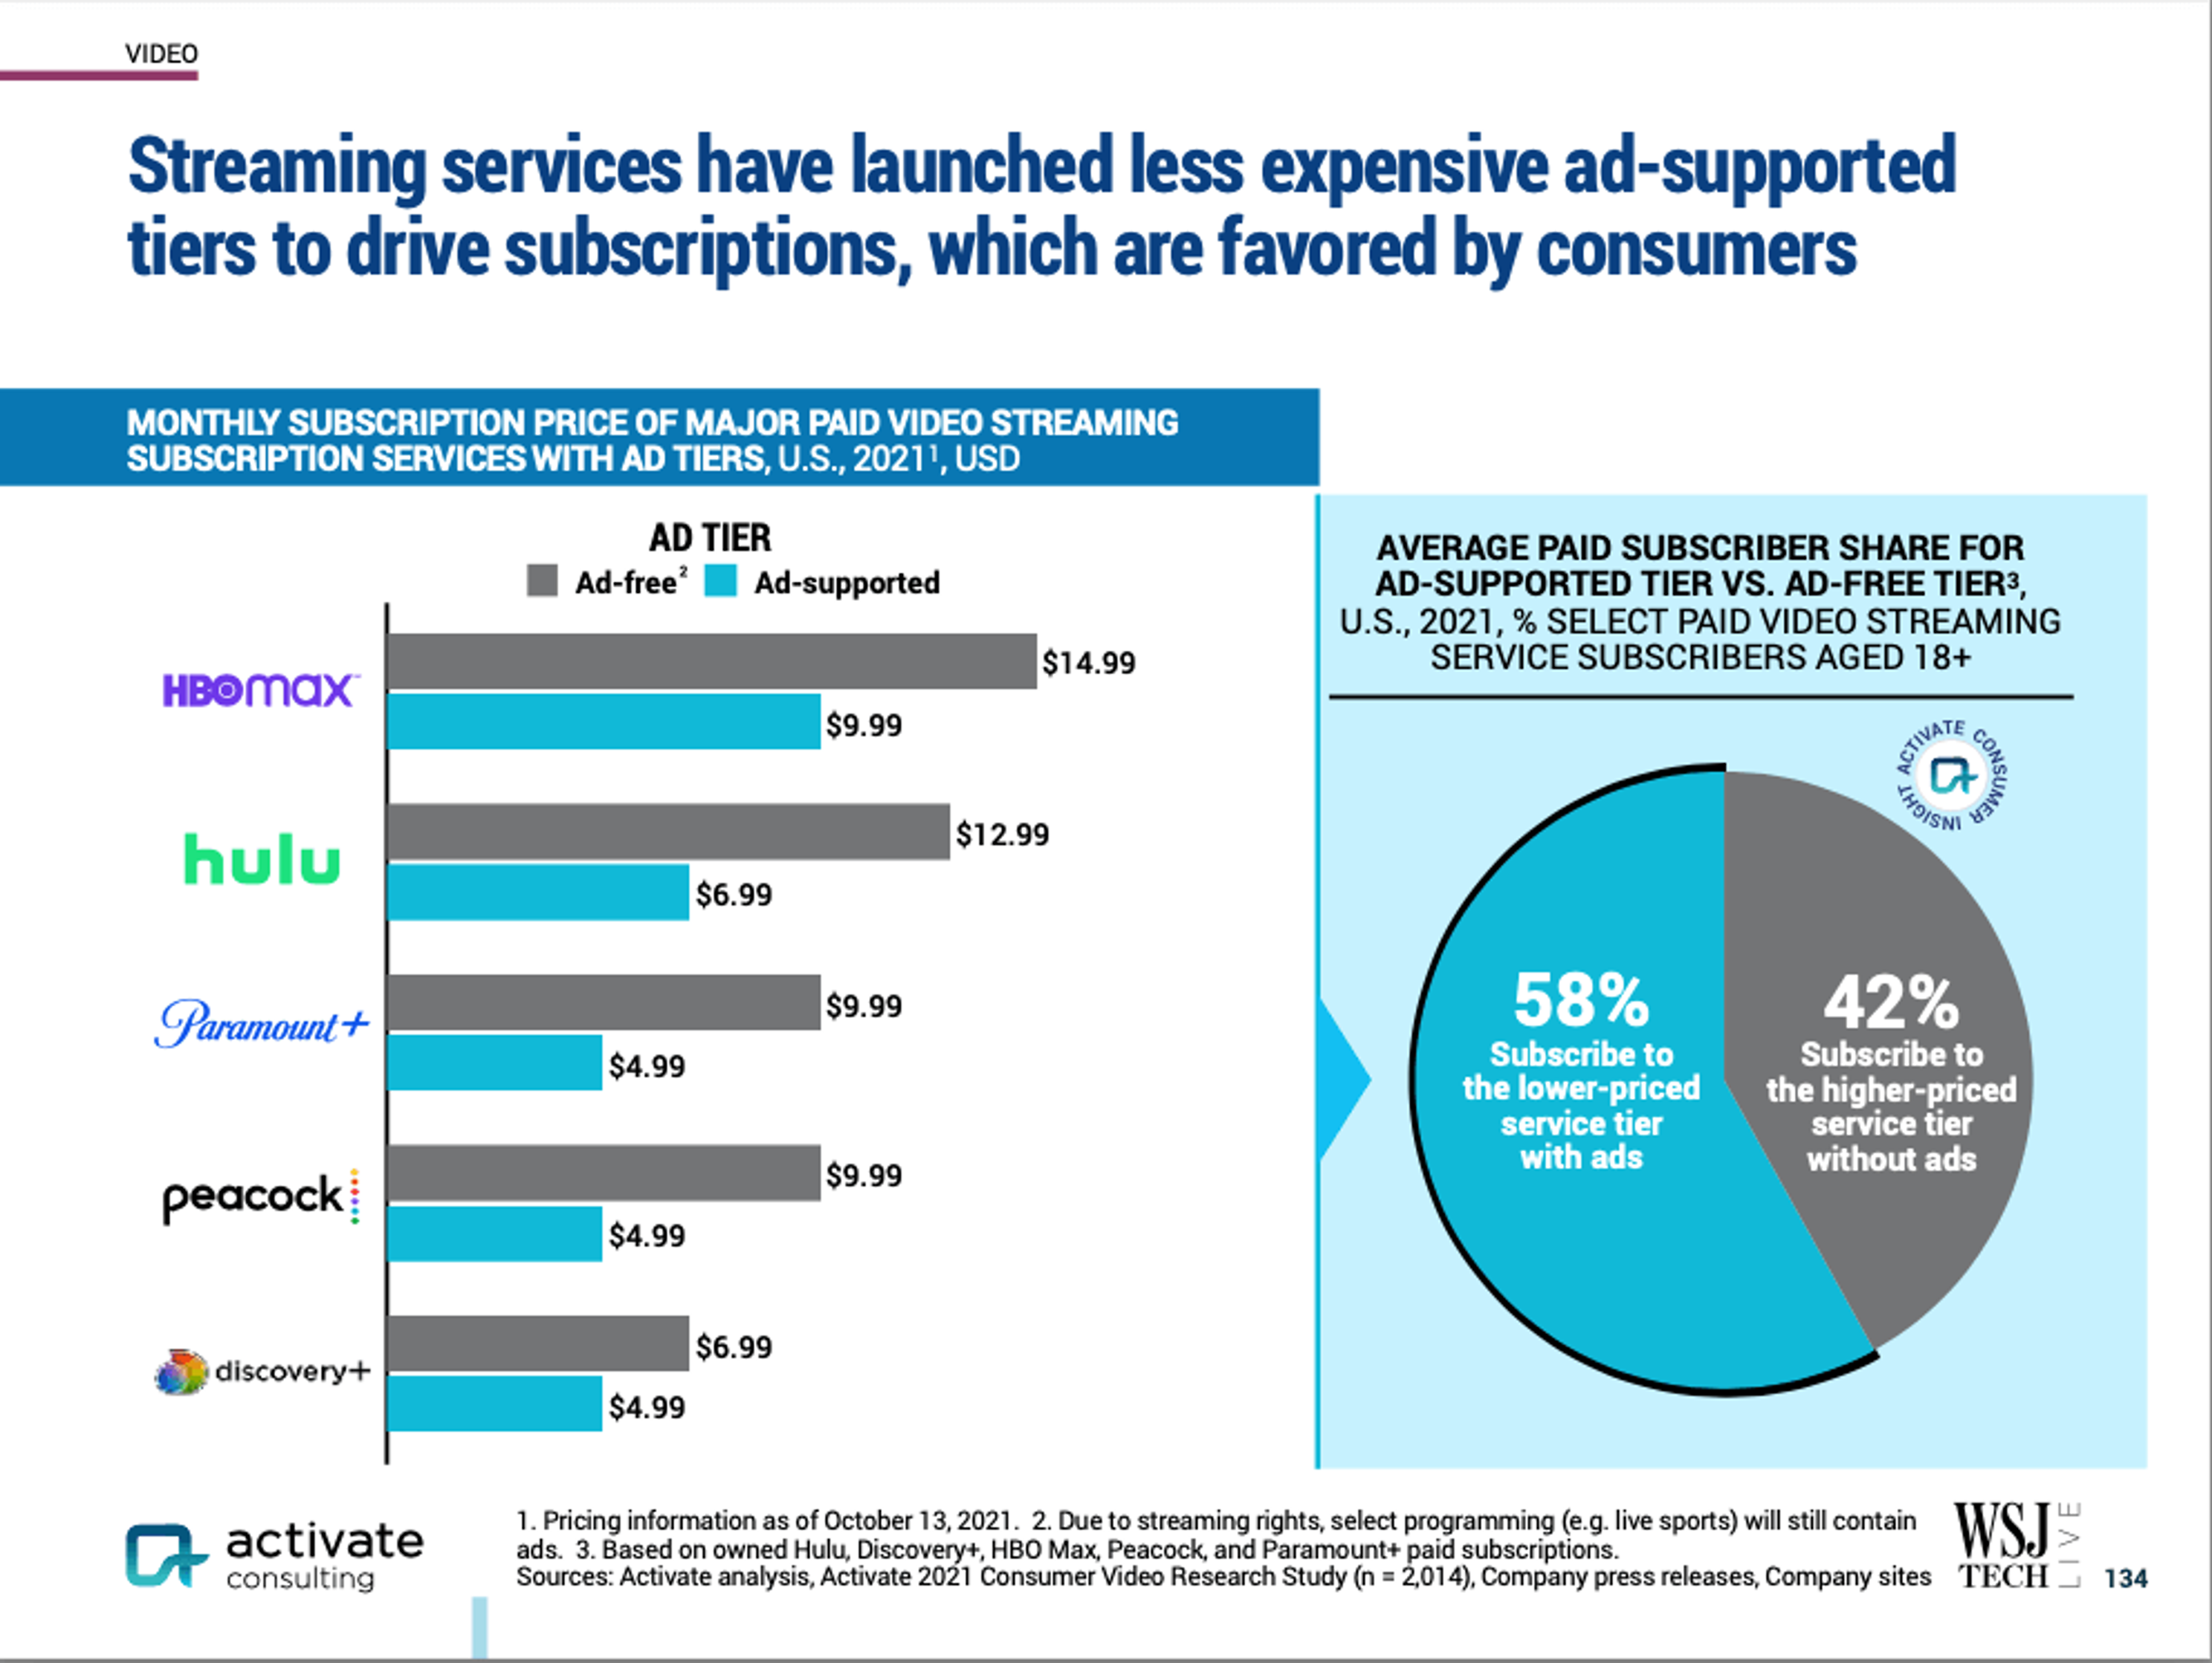 Ad-supported streaming tiers are favored by consumers